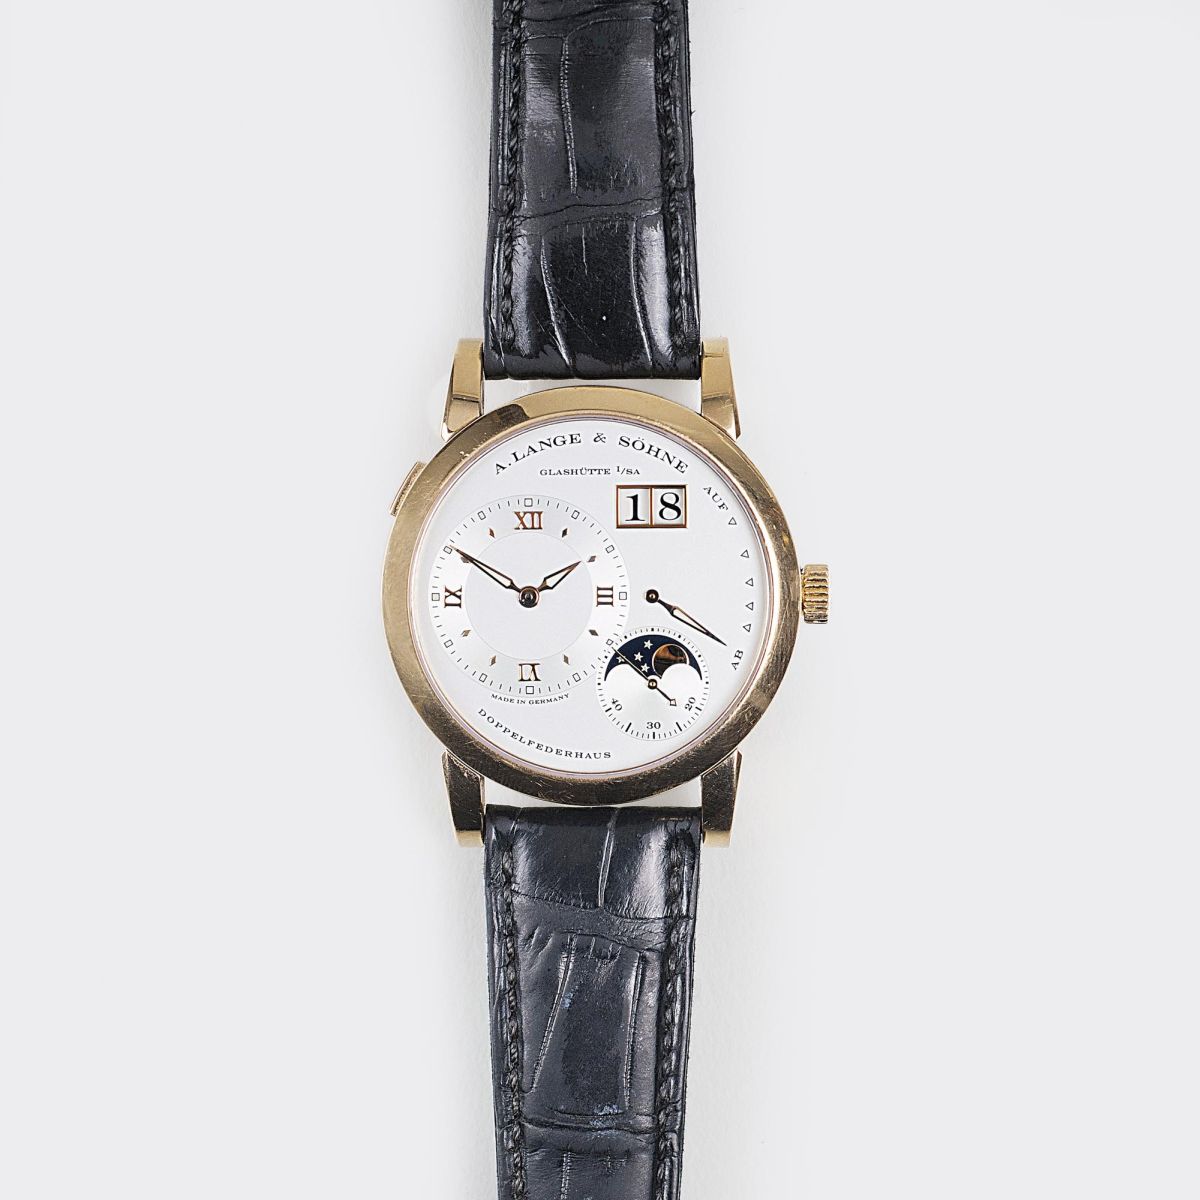 A Gentlemen's Watch 'Lange 1' with Moonphase